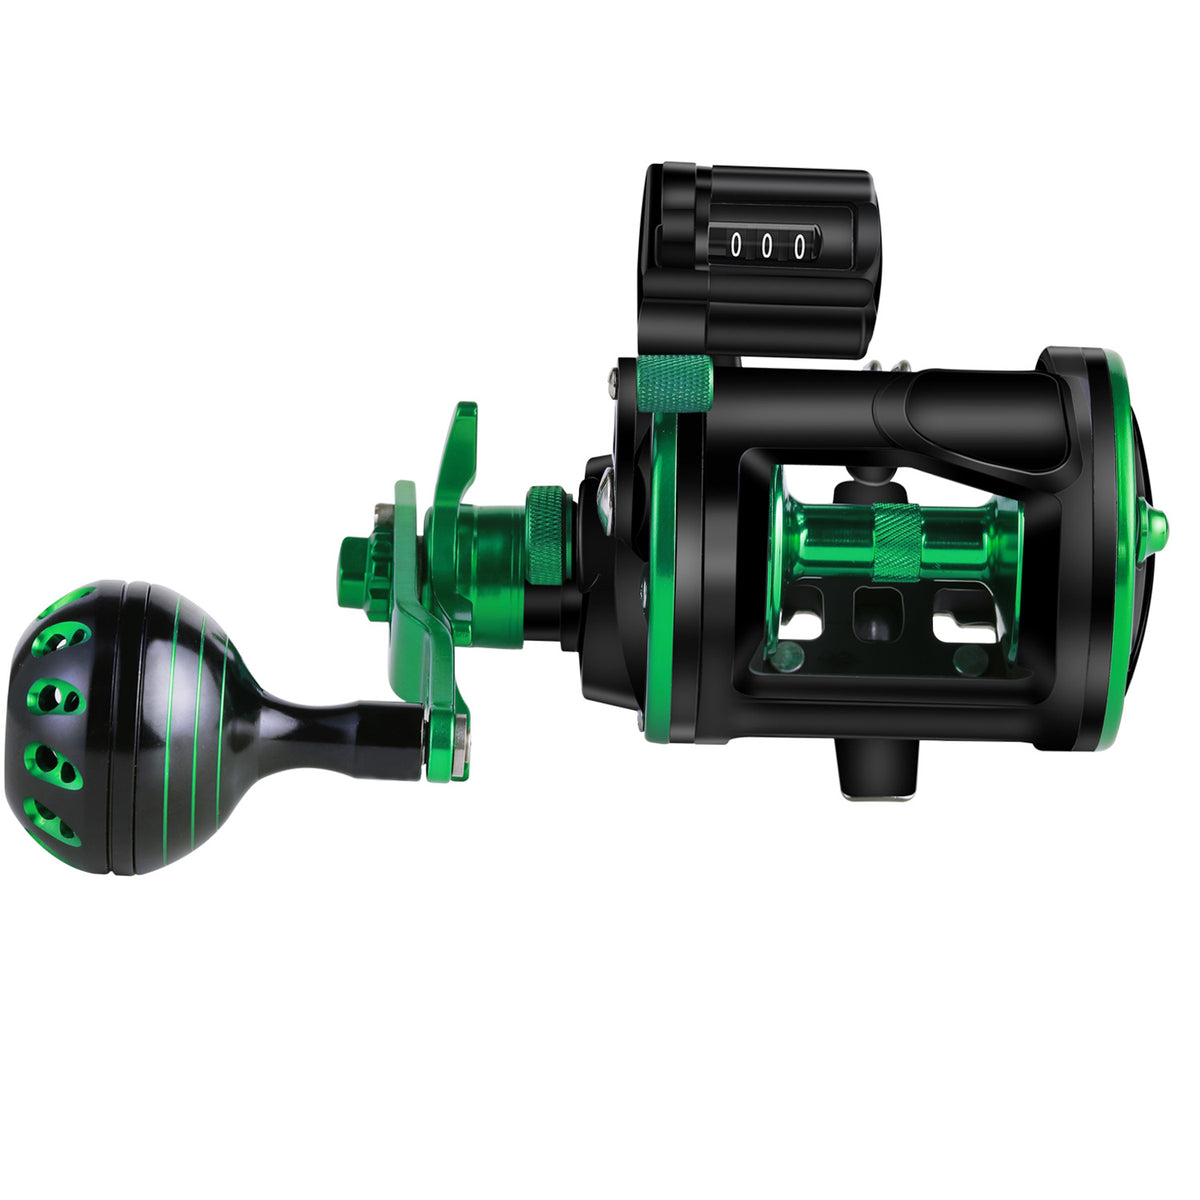 Sougayilang Line Counter Trolling Reel Conventional Level Wind Fishin